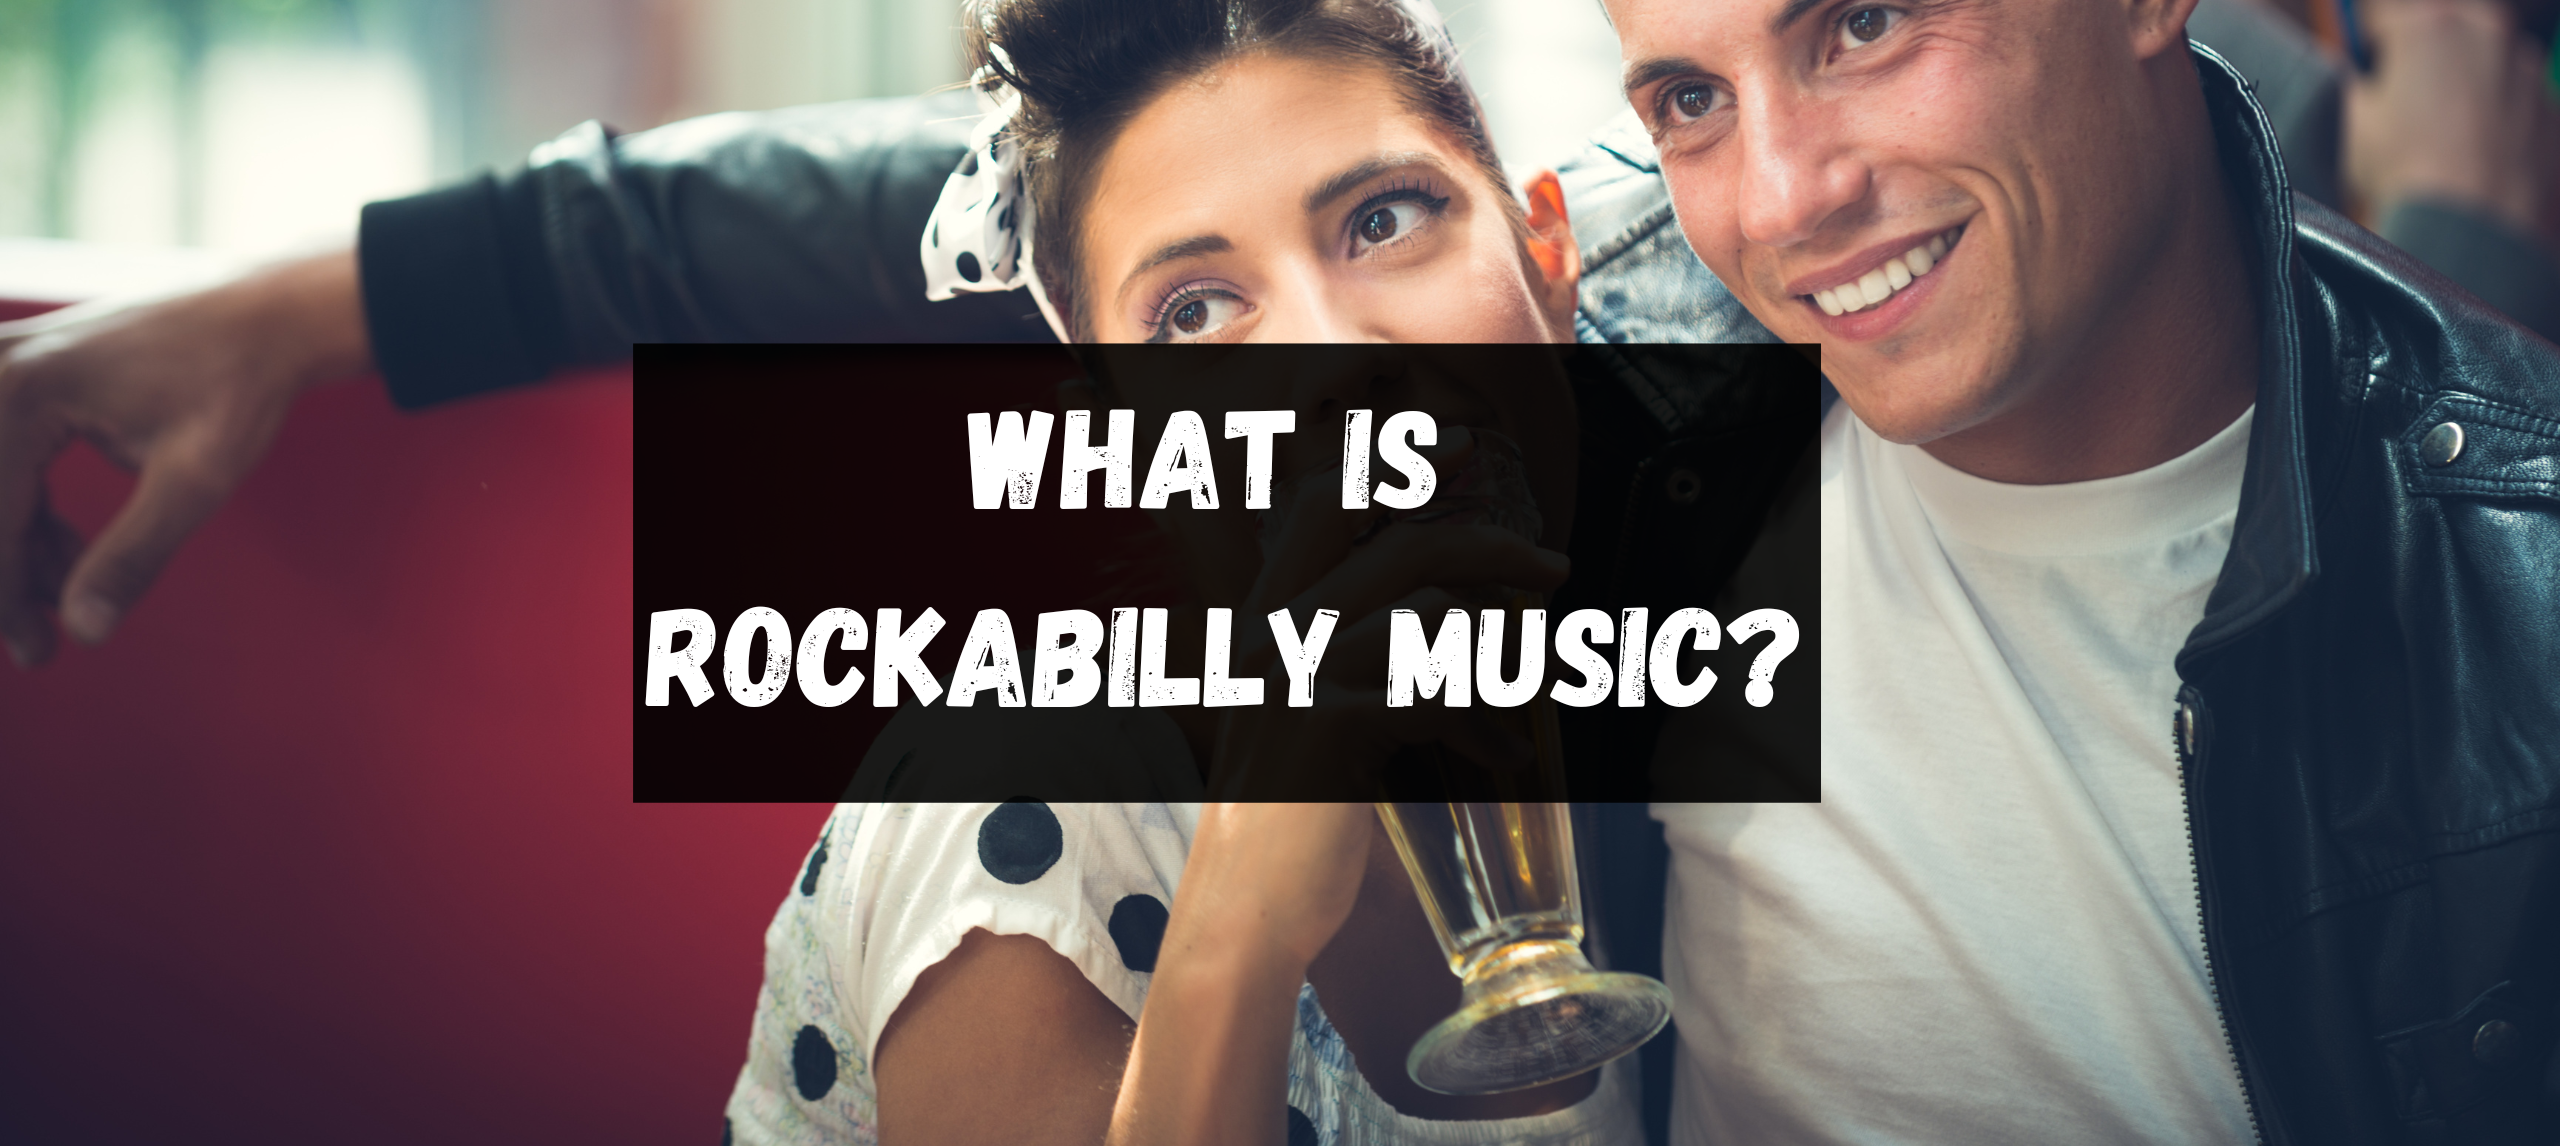 what-is-rockabilly-music